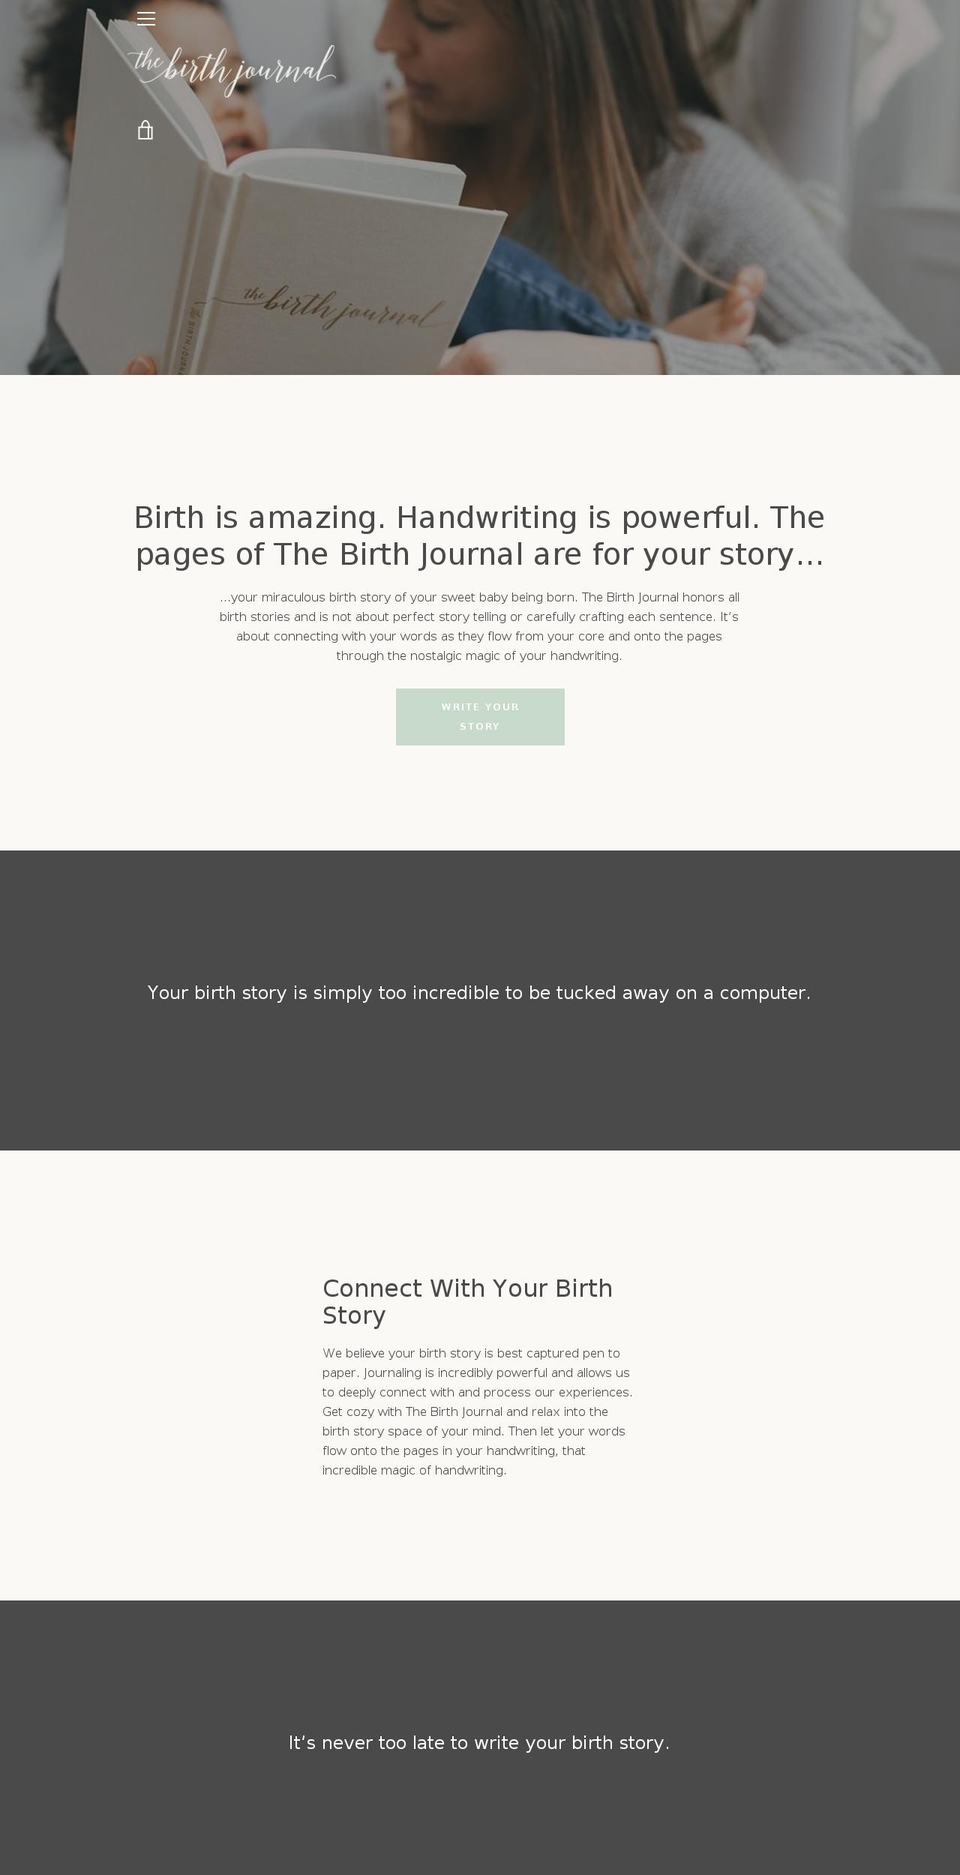 Copy of Narrative Shopify theme site example thebirthjournal.com